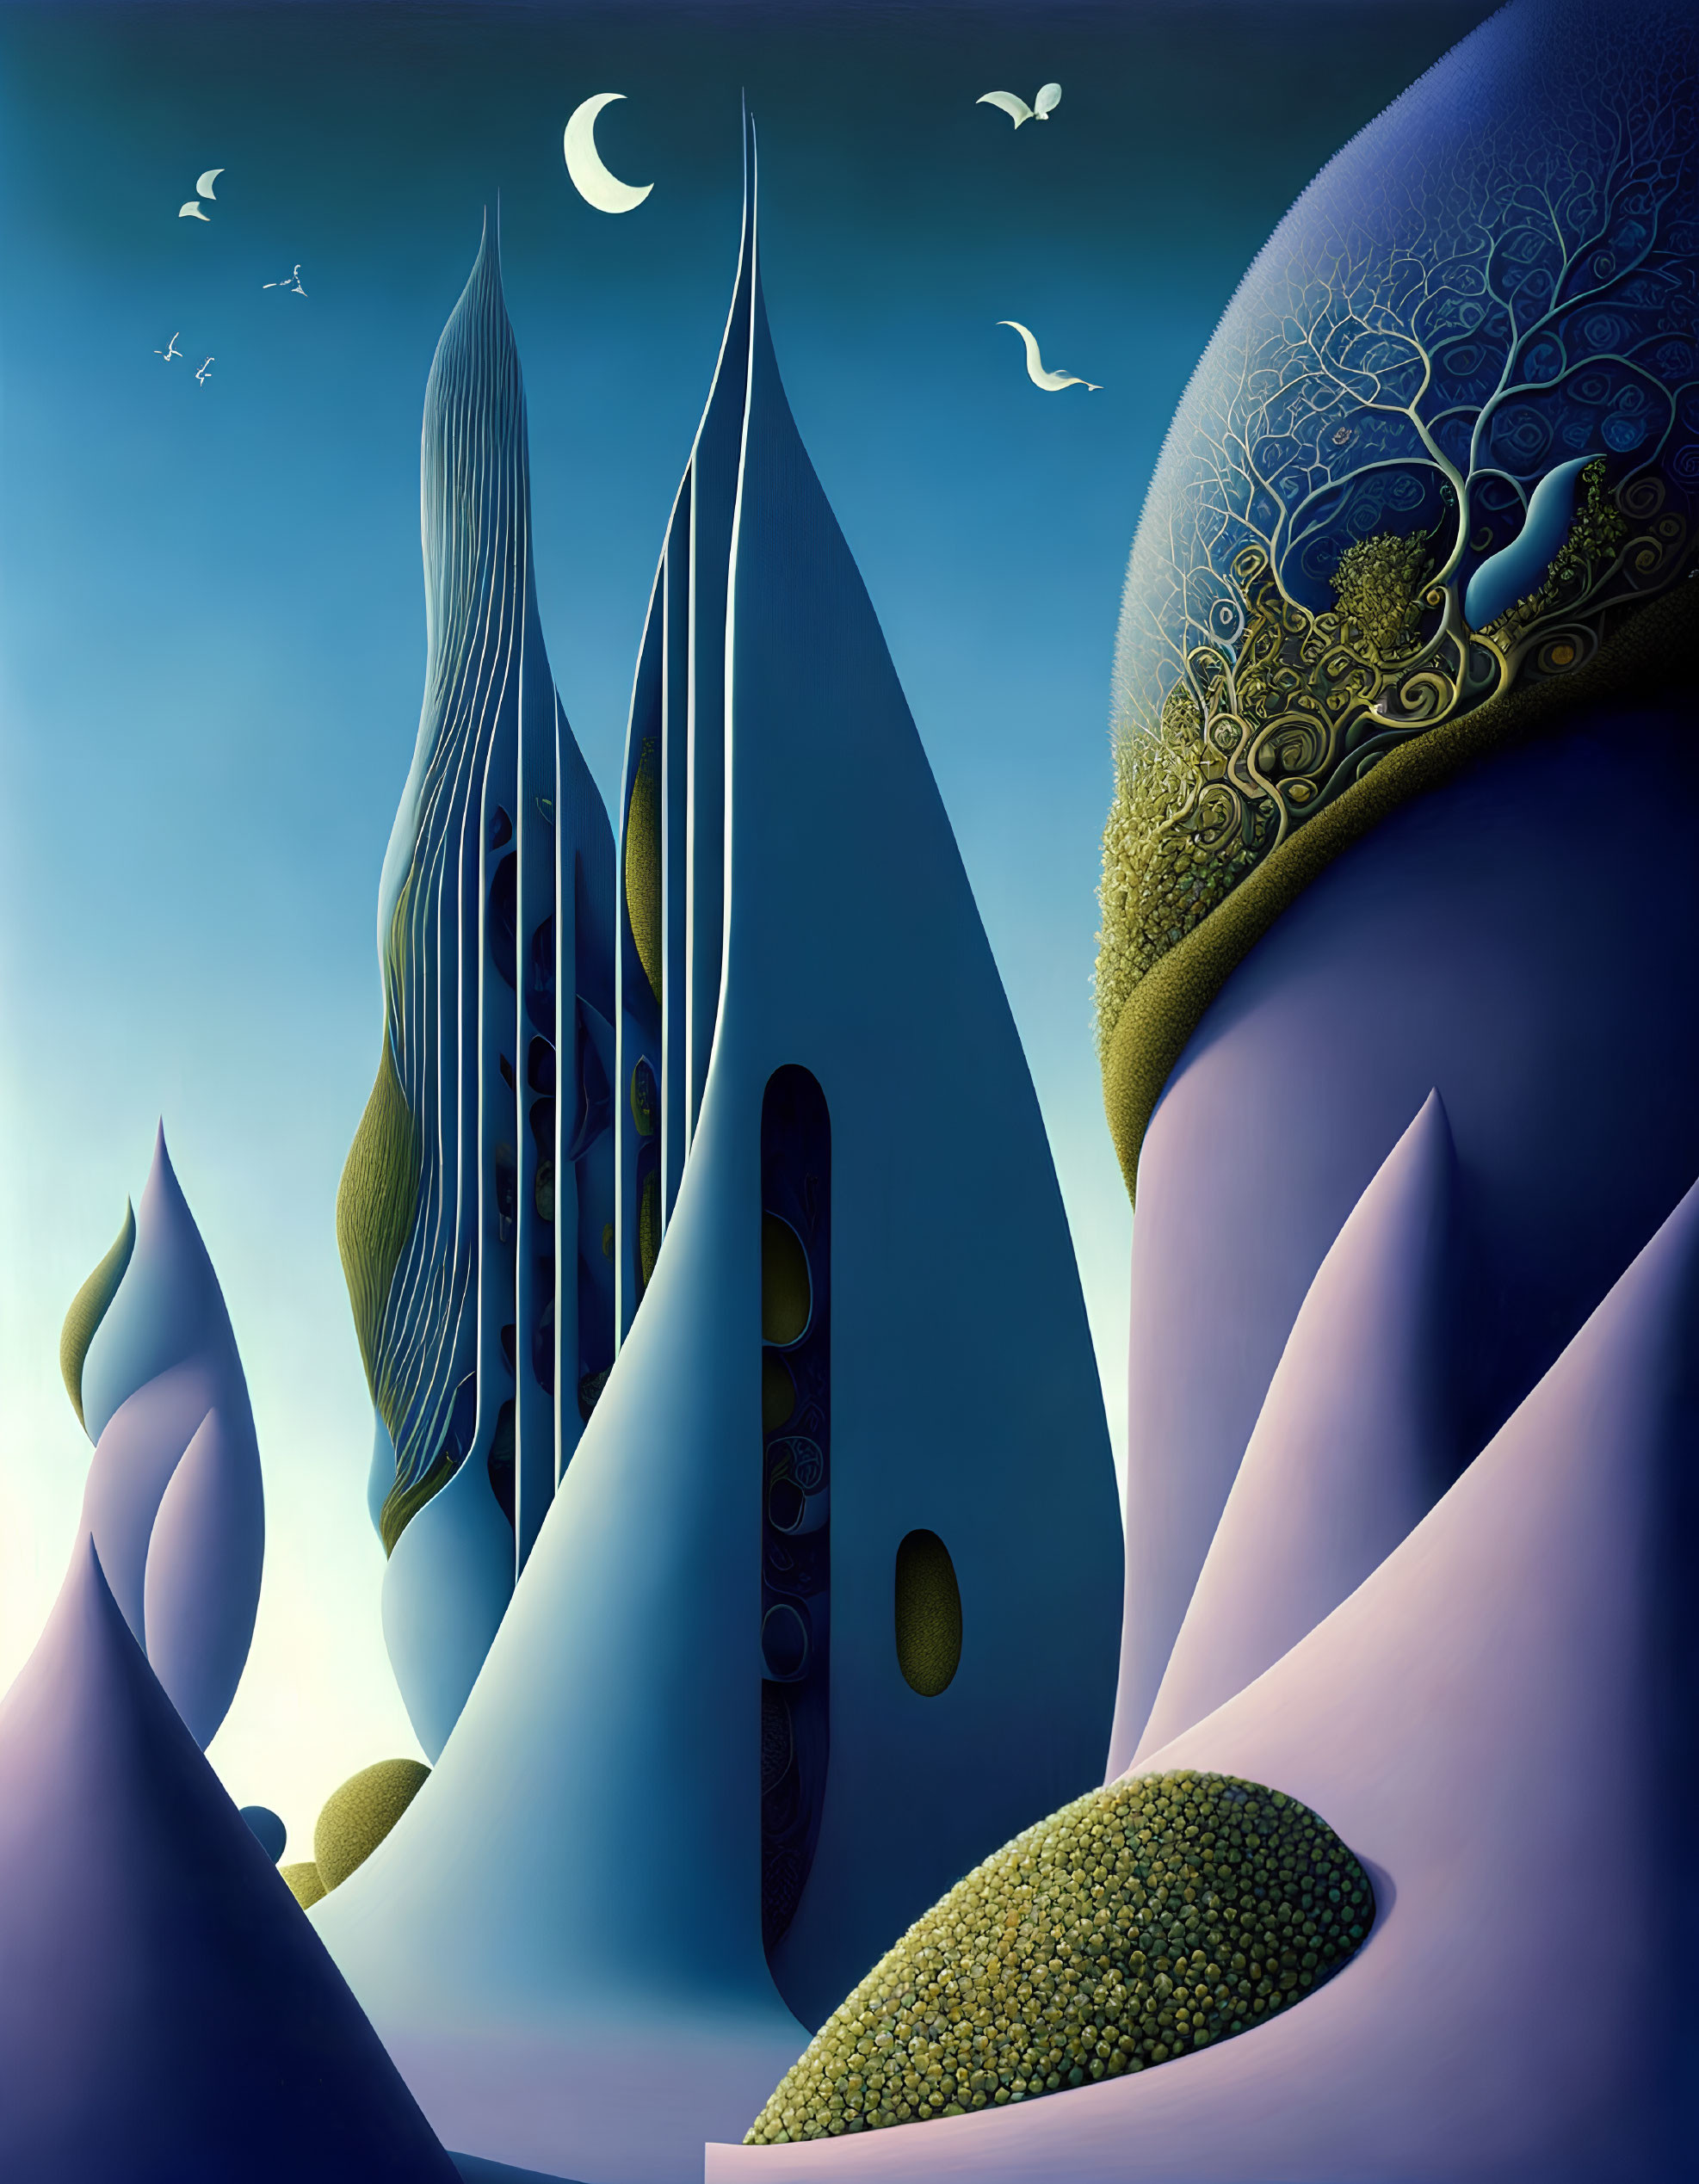 Surreal landscape featuring pointed buildings, rolling hills, twilight sky, crescent moon, and birds